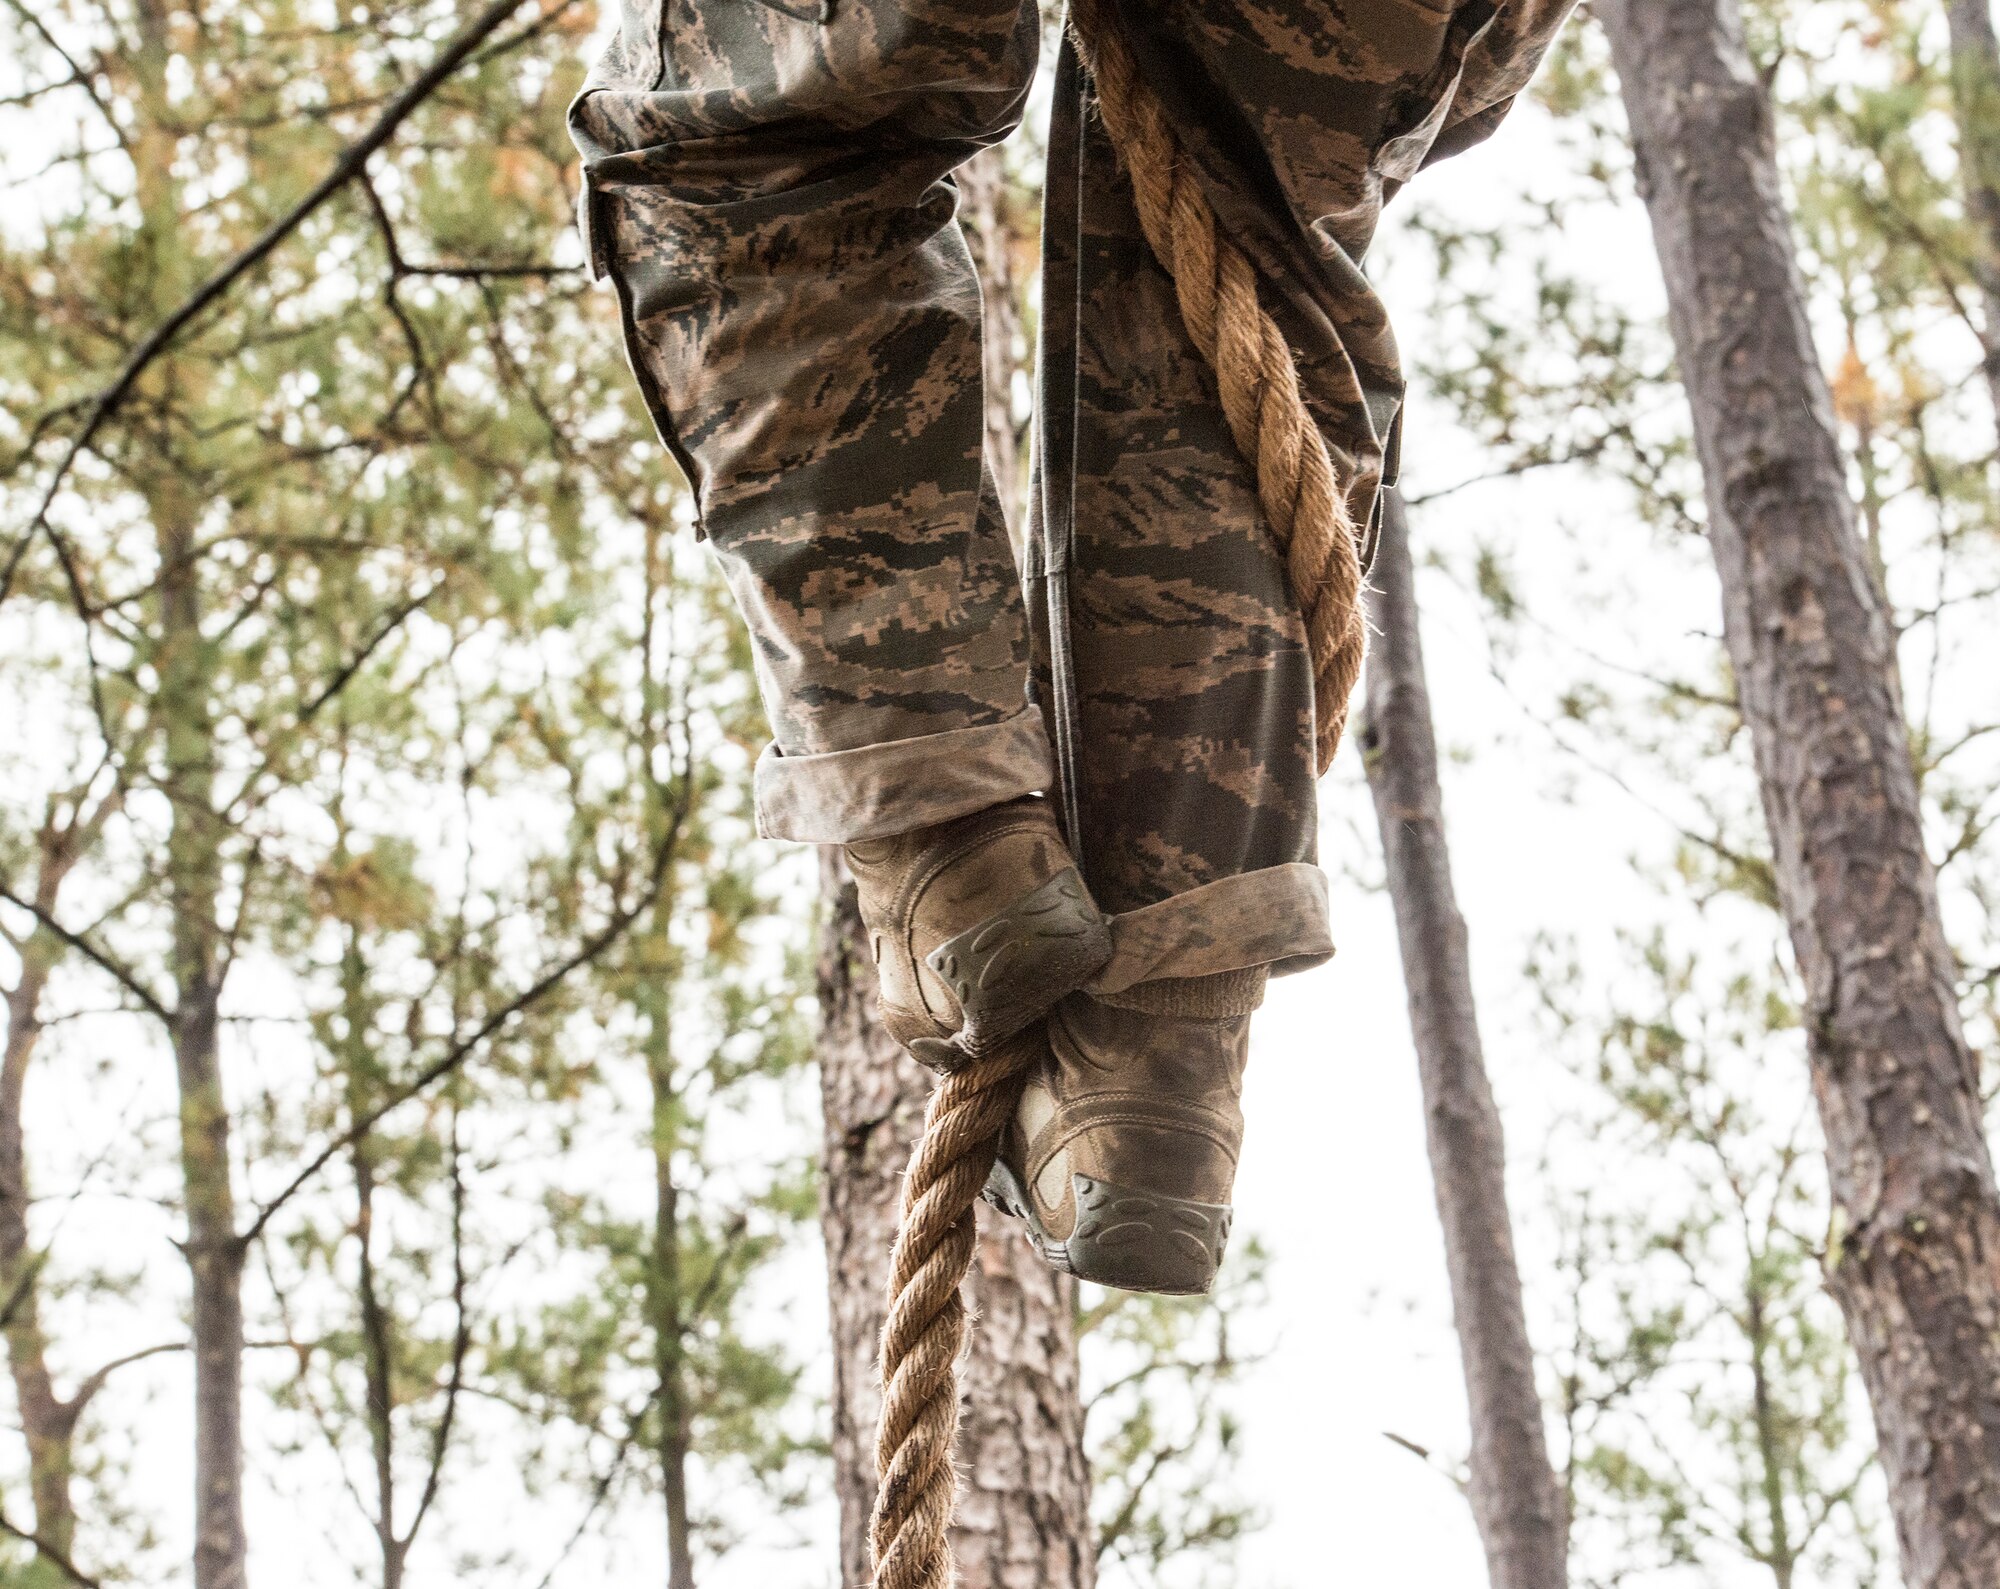 An Airman from the 820th Base Defense Group at Moody Air Force Base, Ga., demonstrates an S-lock during an air assault assessment, Dec. 15, 2015, at Camp Blanding, Fla. Climbers use an S-lock to secure themselves in order to prevent from sliding to the bottom. (U.S. Air Force photo by Airman 1st Class Lauren M. Johnson/Released)